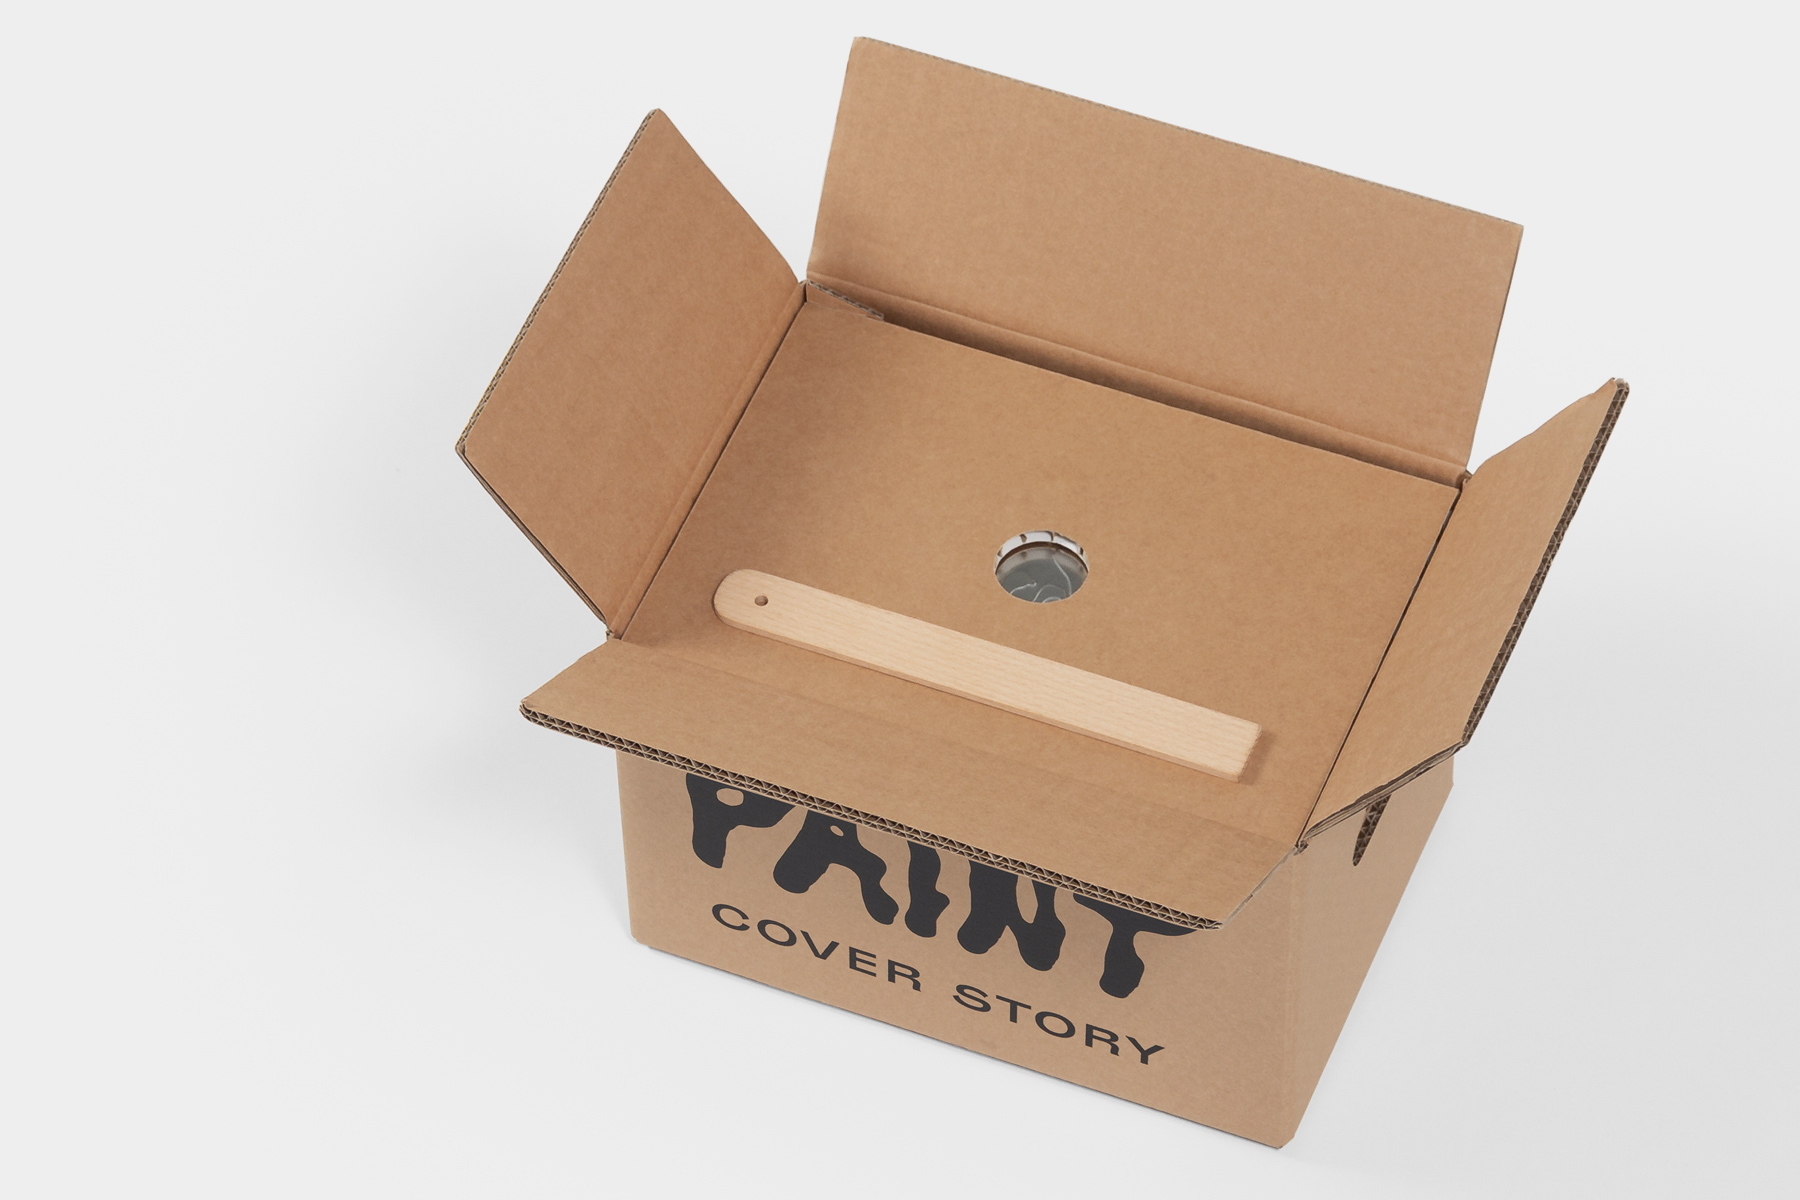 Cover Story paint packaging design